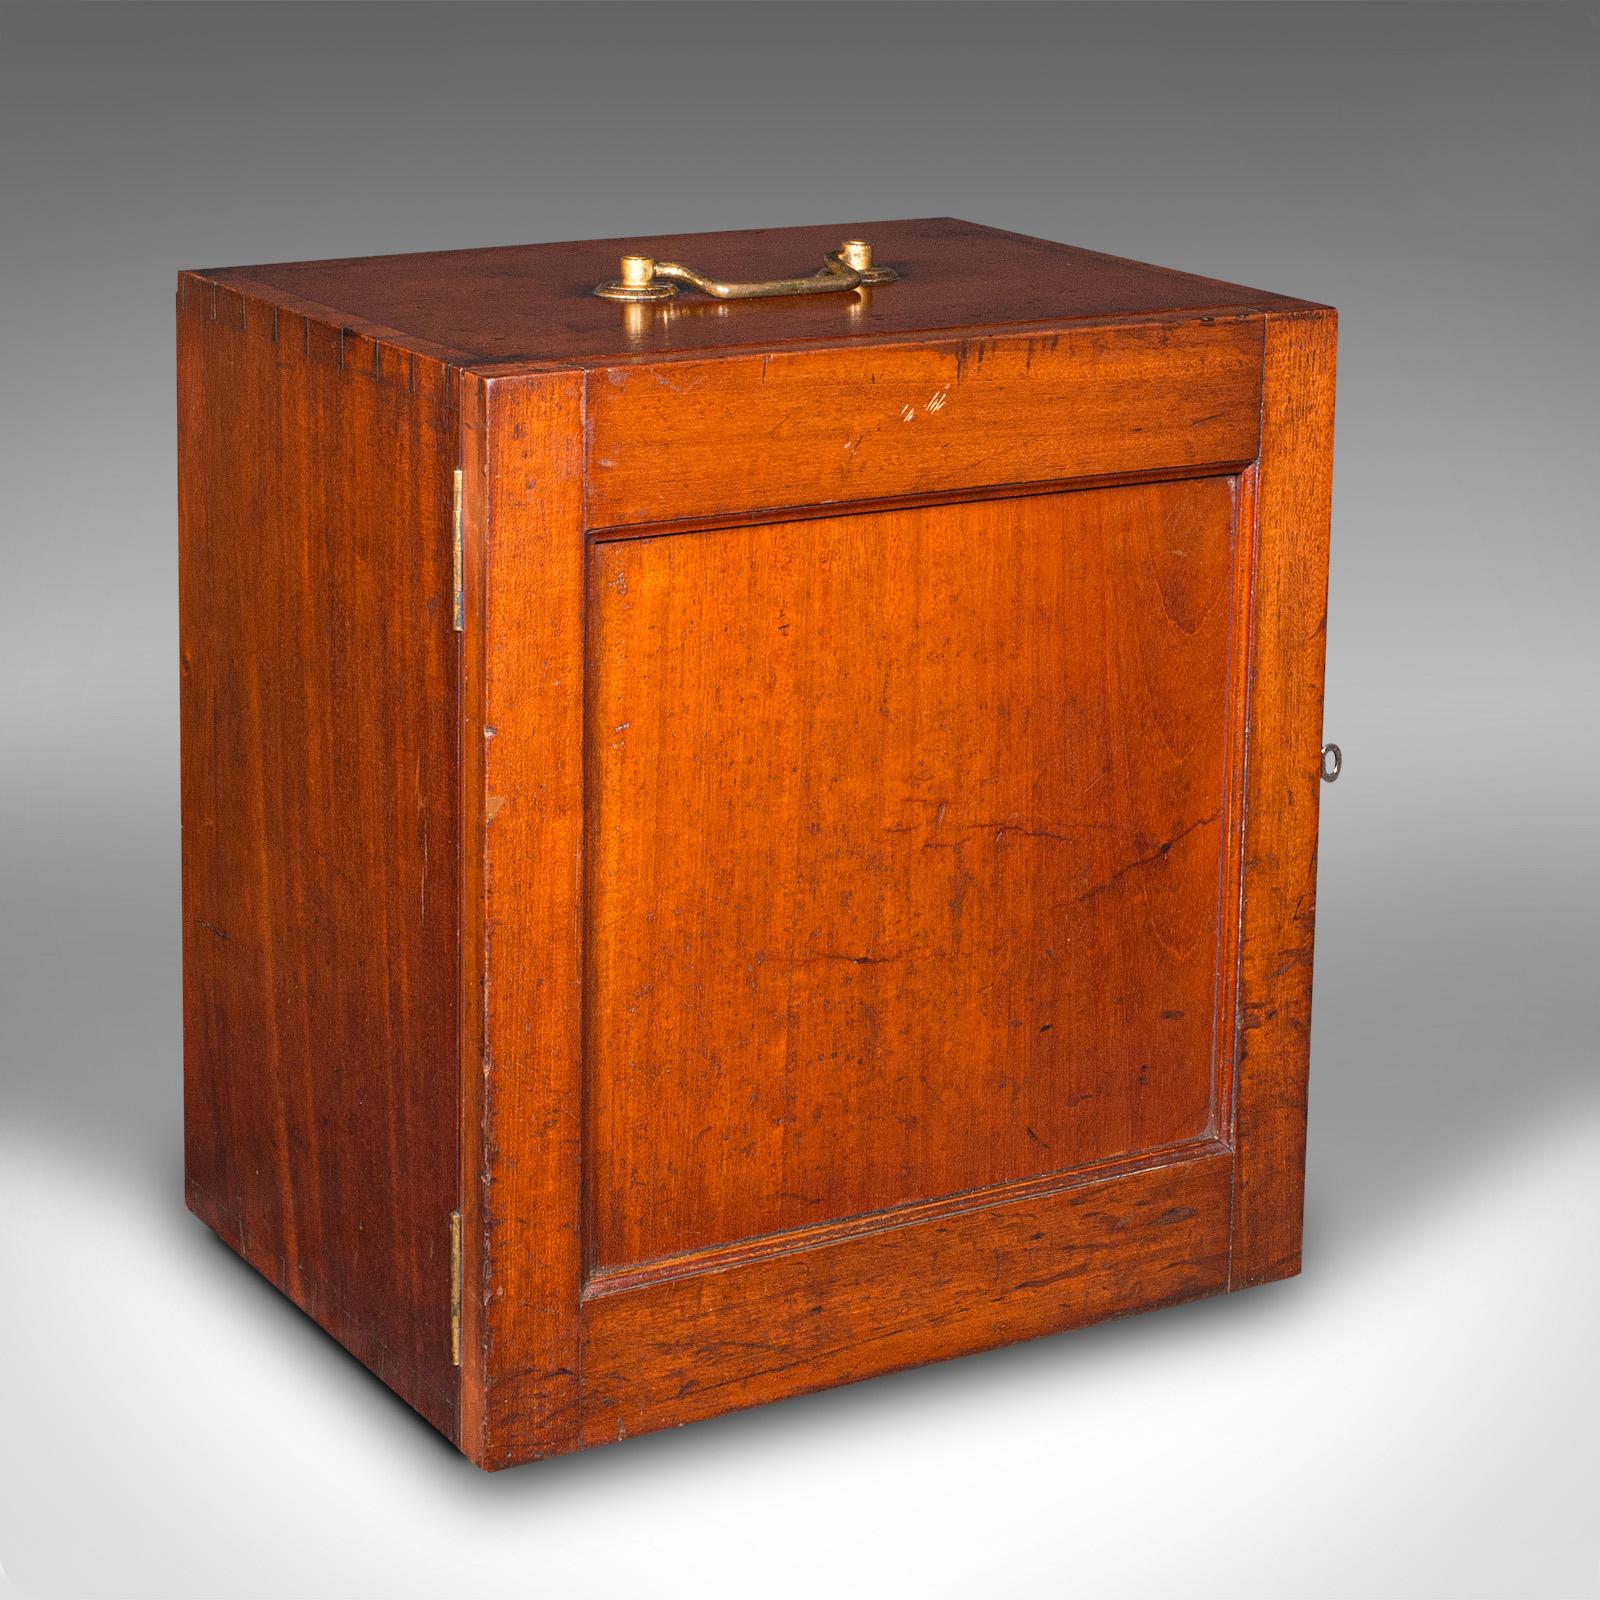 This is an antique calligrapher's case. An English, mahogany 3 drawer specimen cabinet, dating to the mid Victorian period, circa 1860.

Quality craftsmanship to this delightful storage case
Displays a desirable aged patina and in good